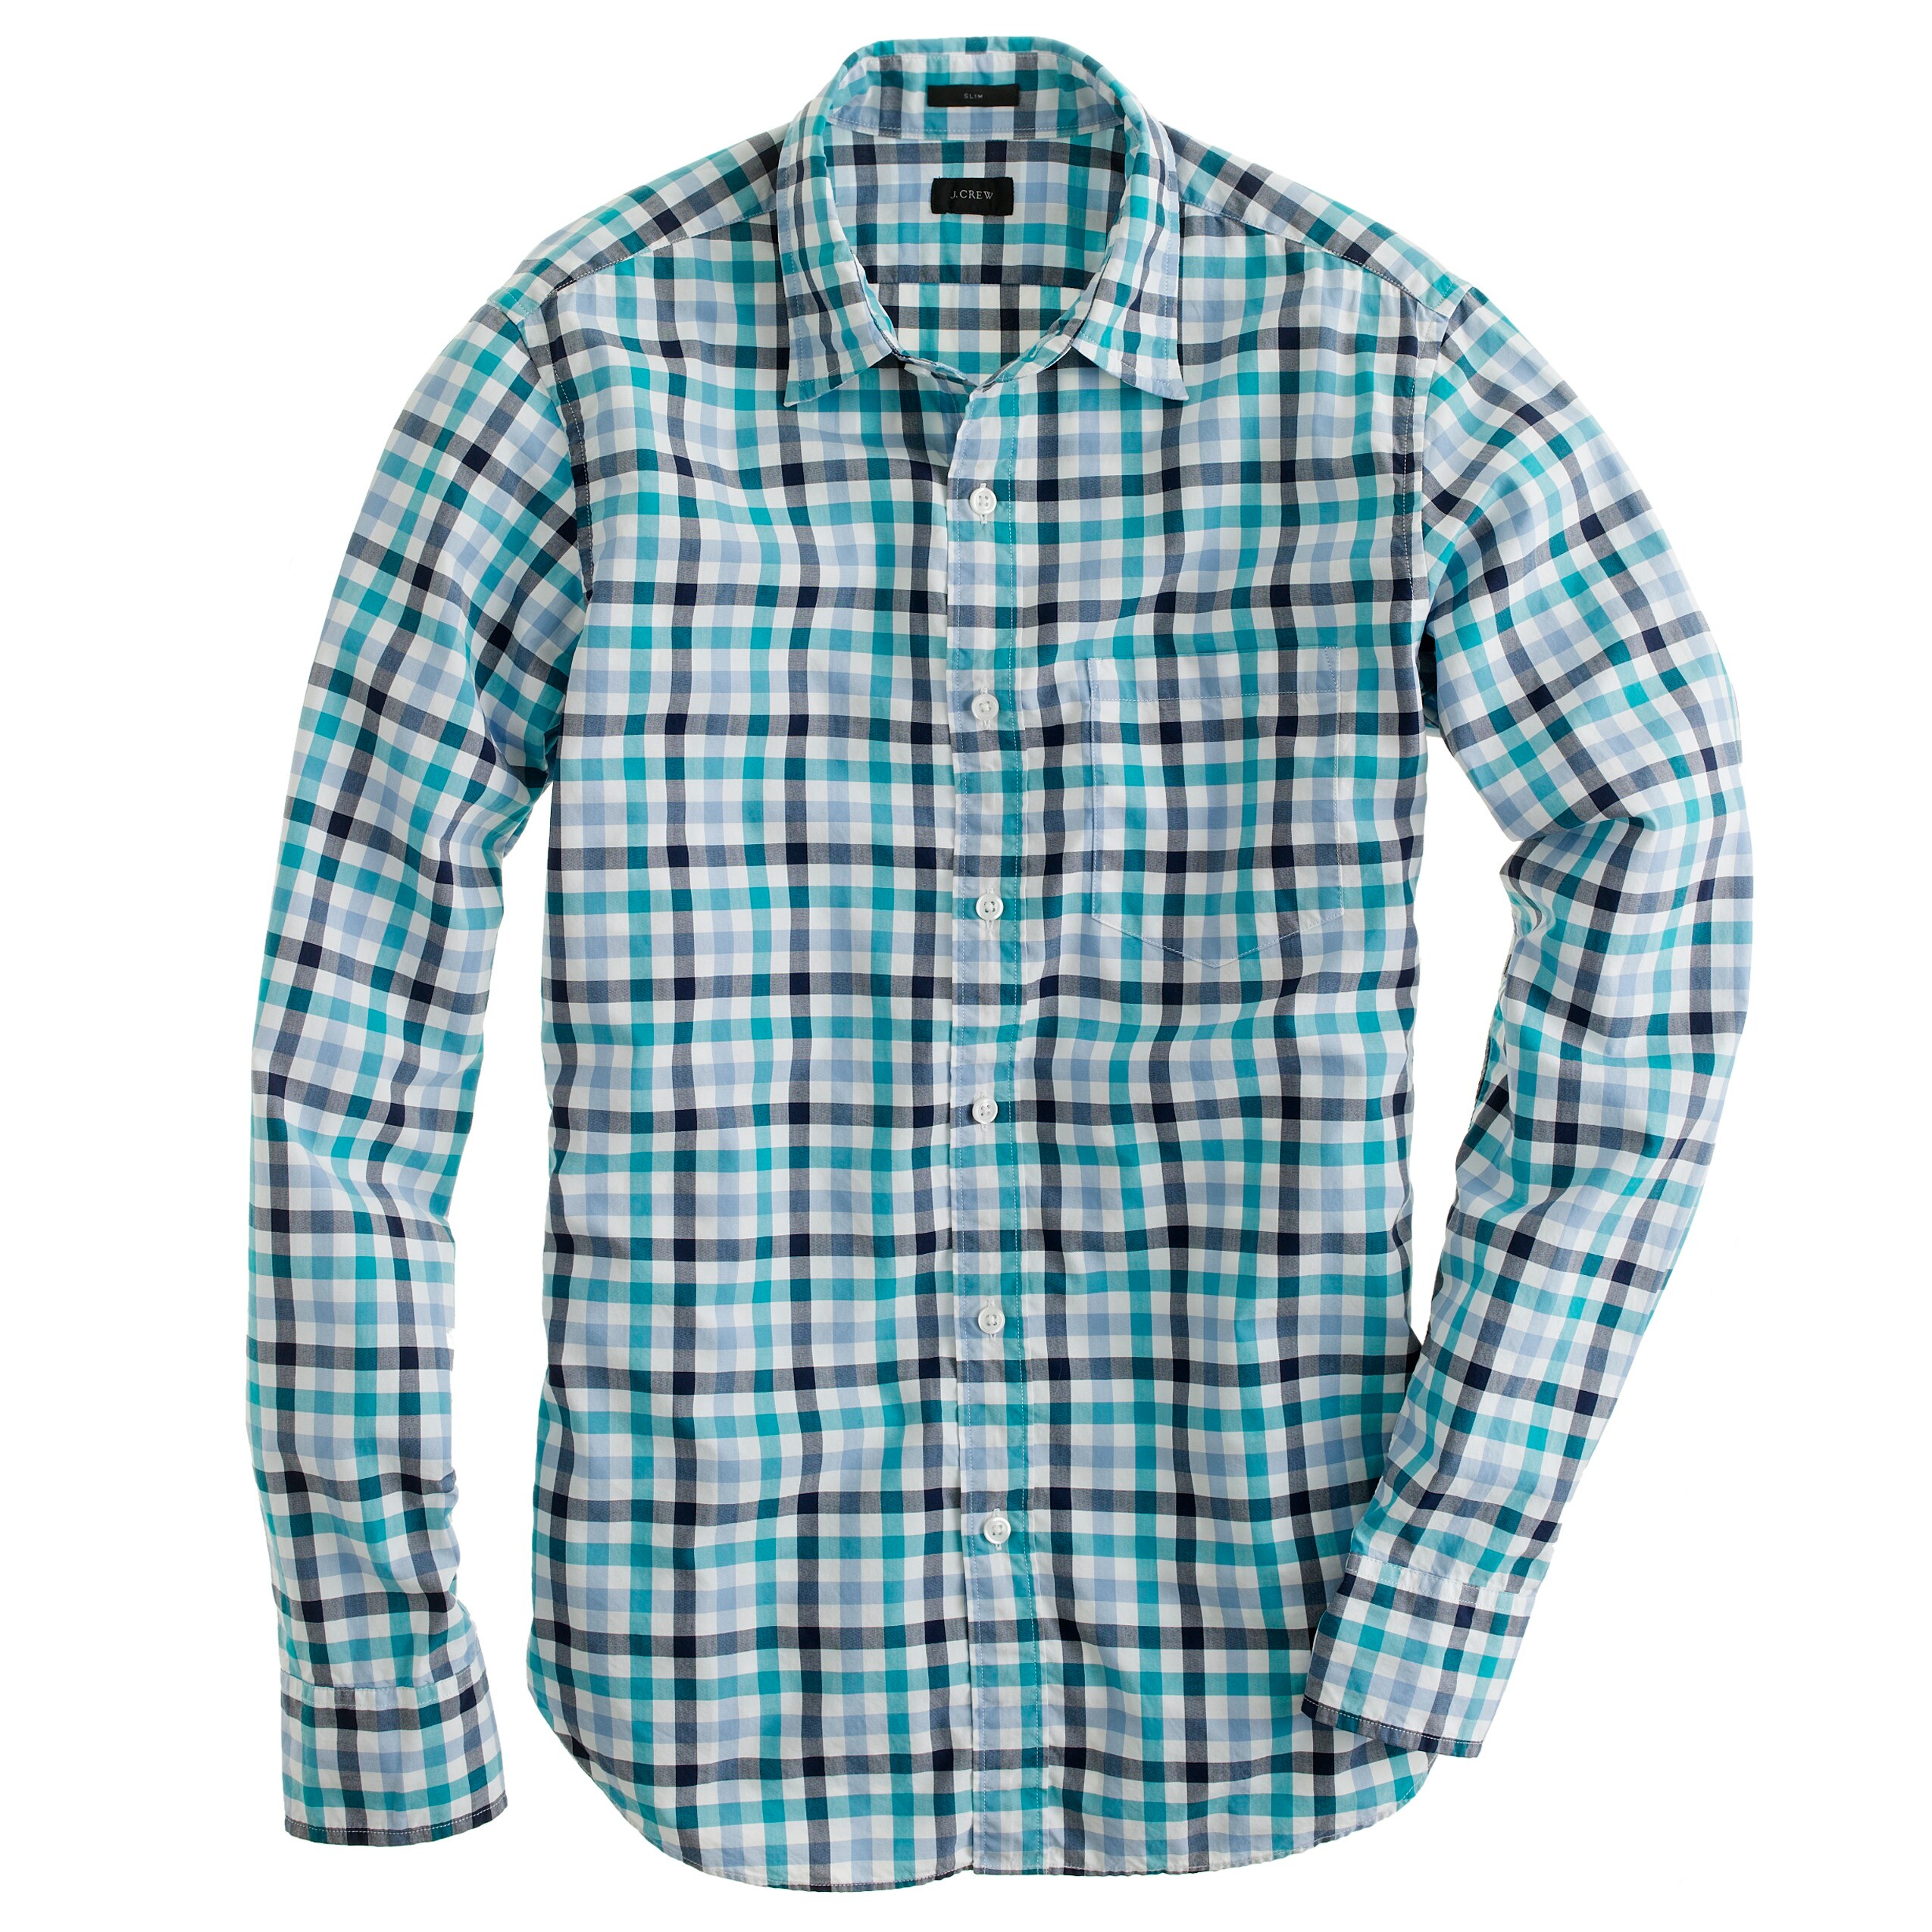 Secret Wash shirt in turquoise check : | J.Crew